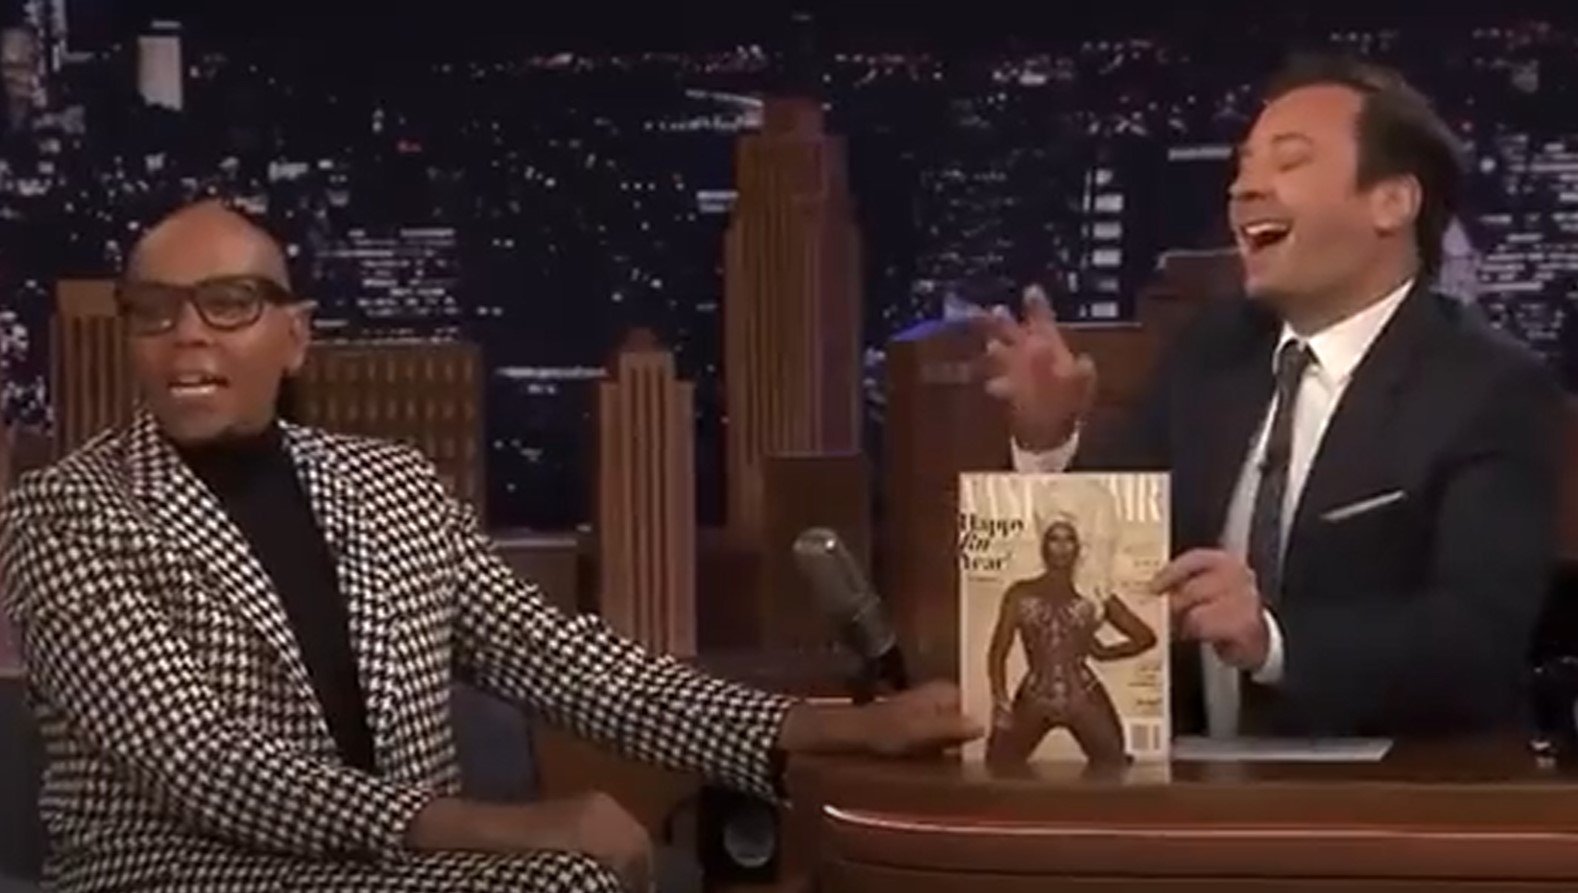 It turned out RuPaul just joked at Fallon. Image Credit: The Tonight Show